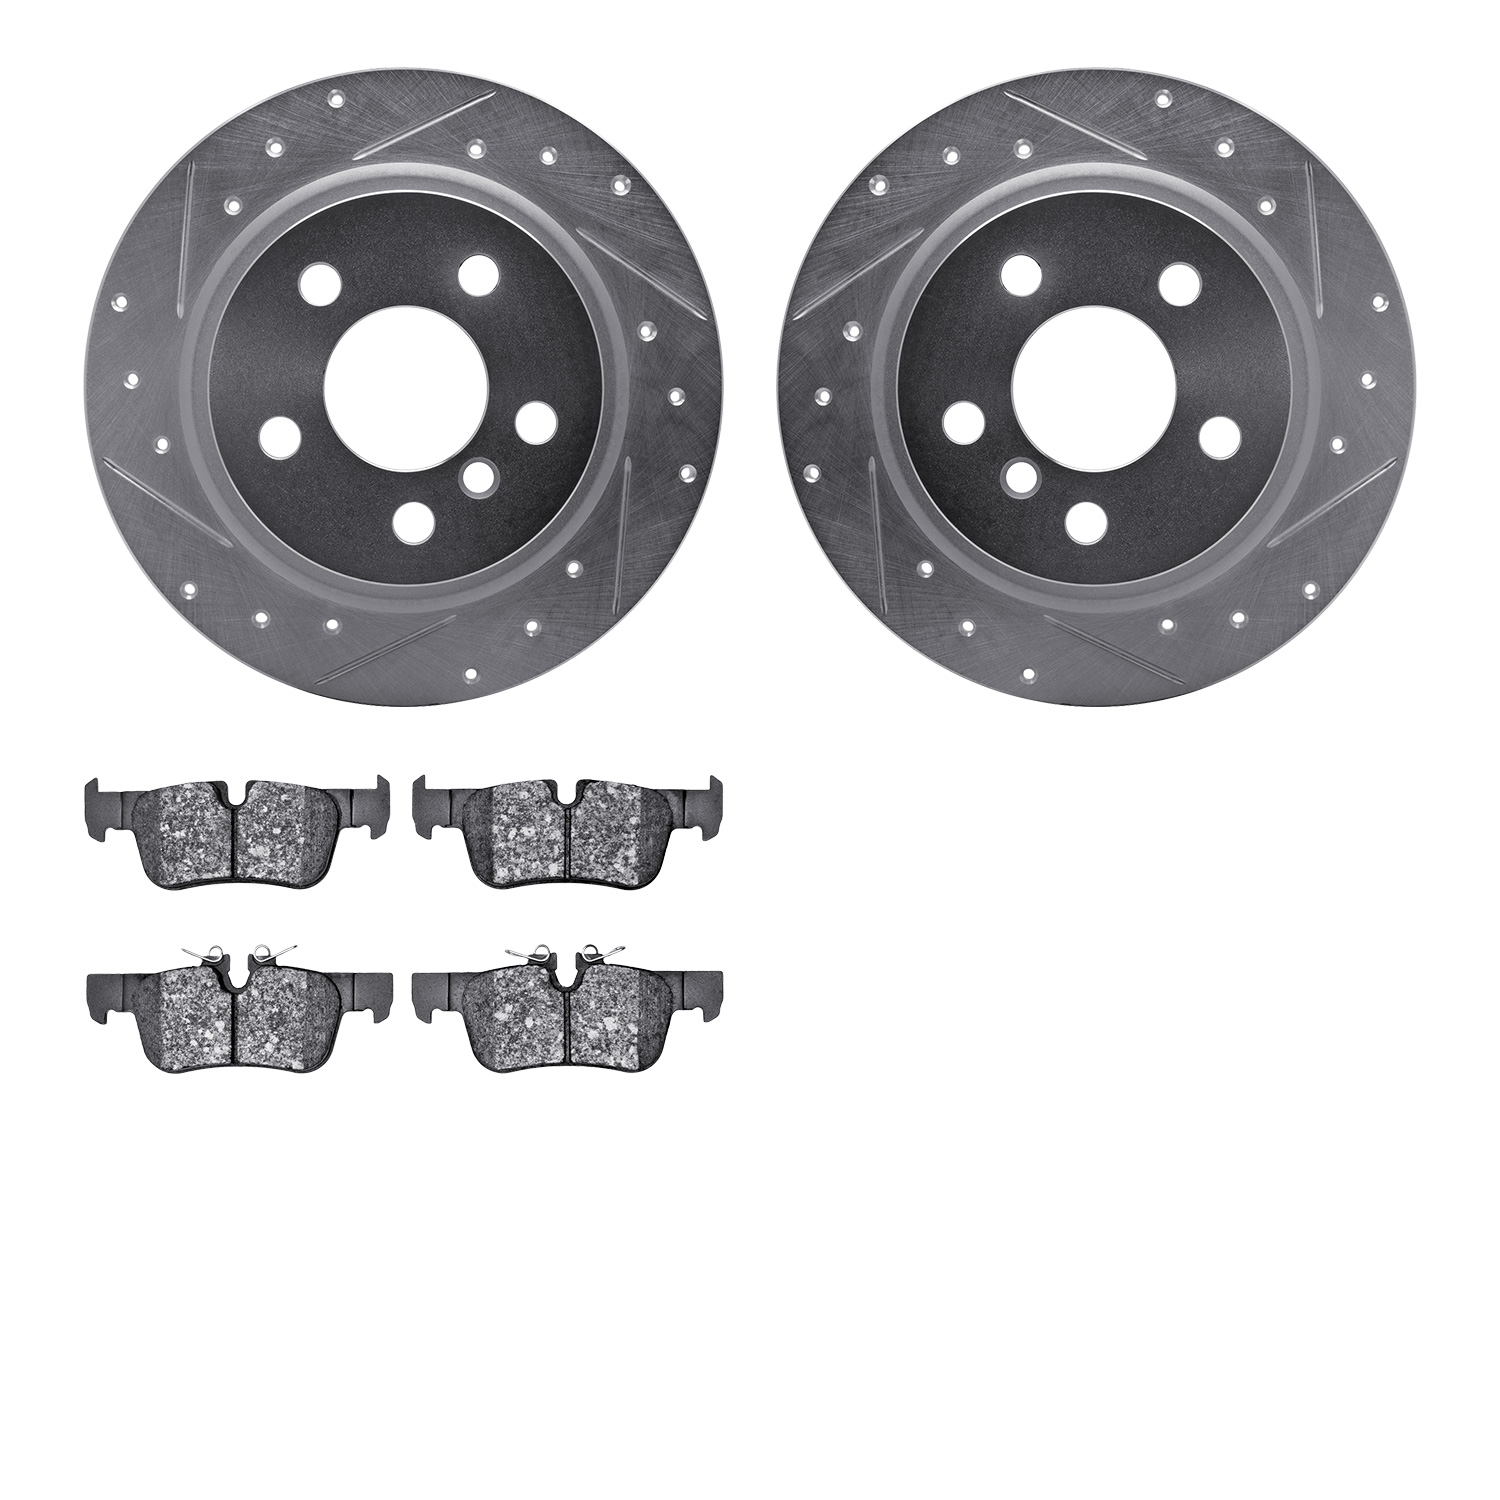 7502-32021 Drilled/Slotted Brake Rotors w/5000 Advanced Brake Pads Kit [Silver], Fits Select Multiple Makes/Models, Position: Re